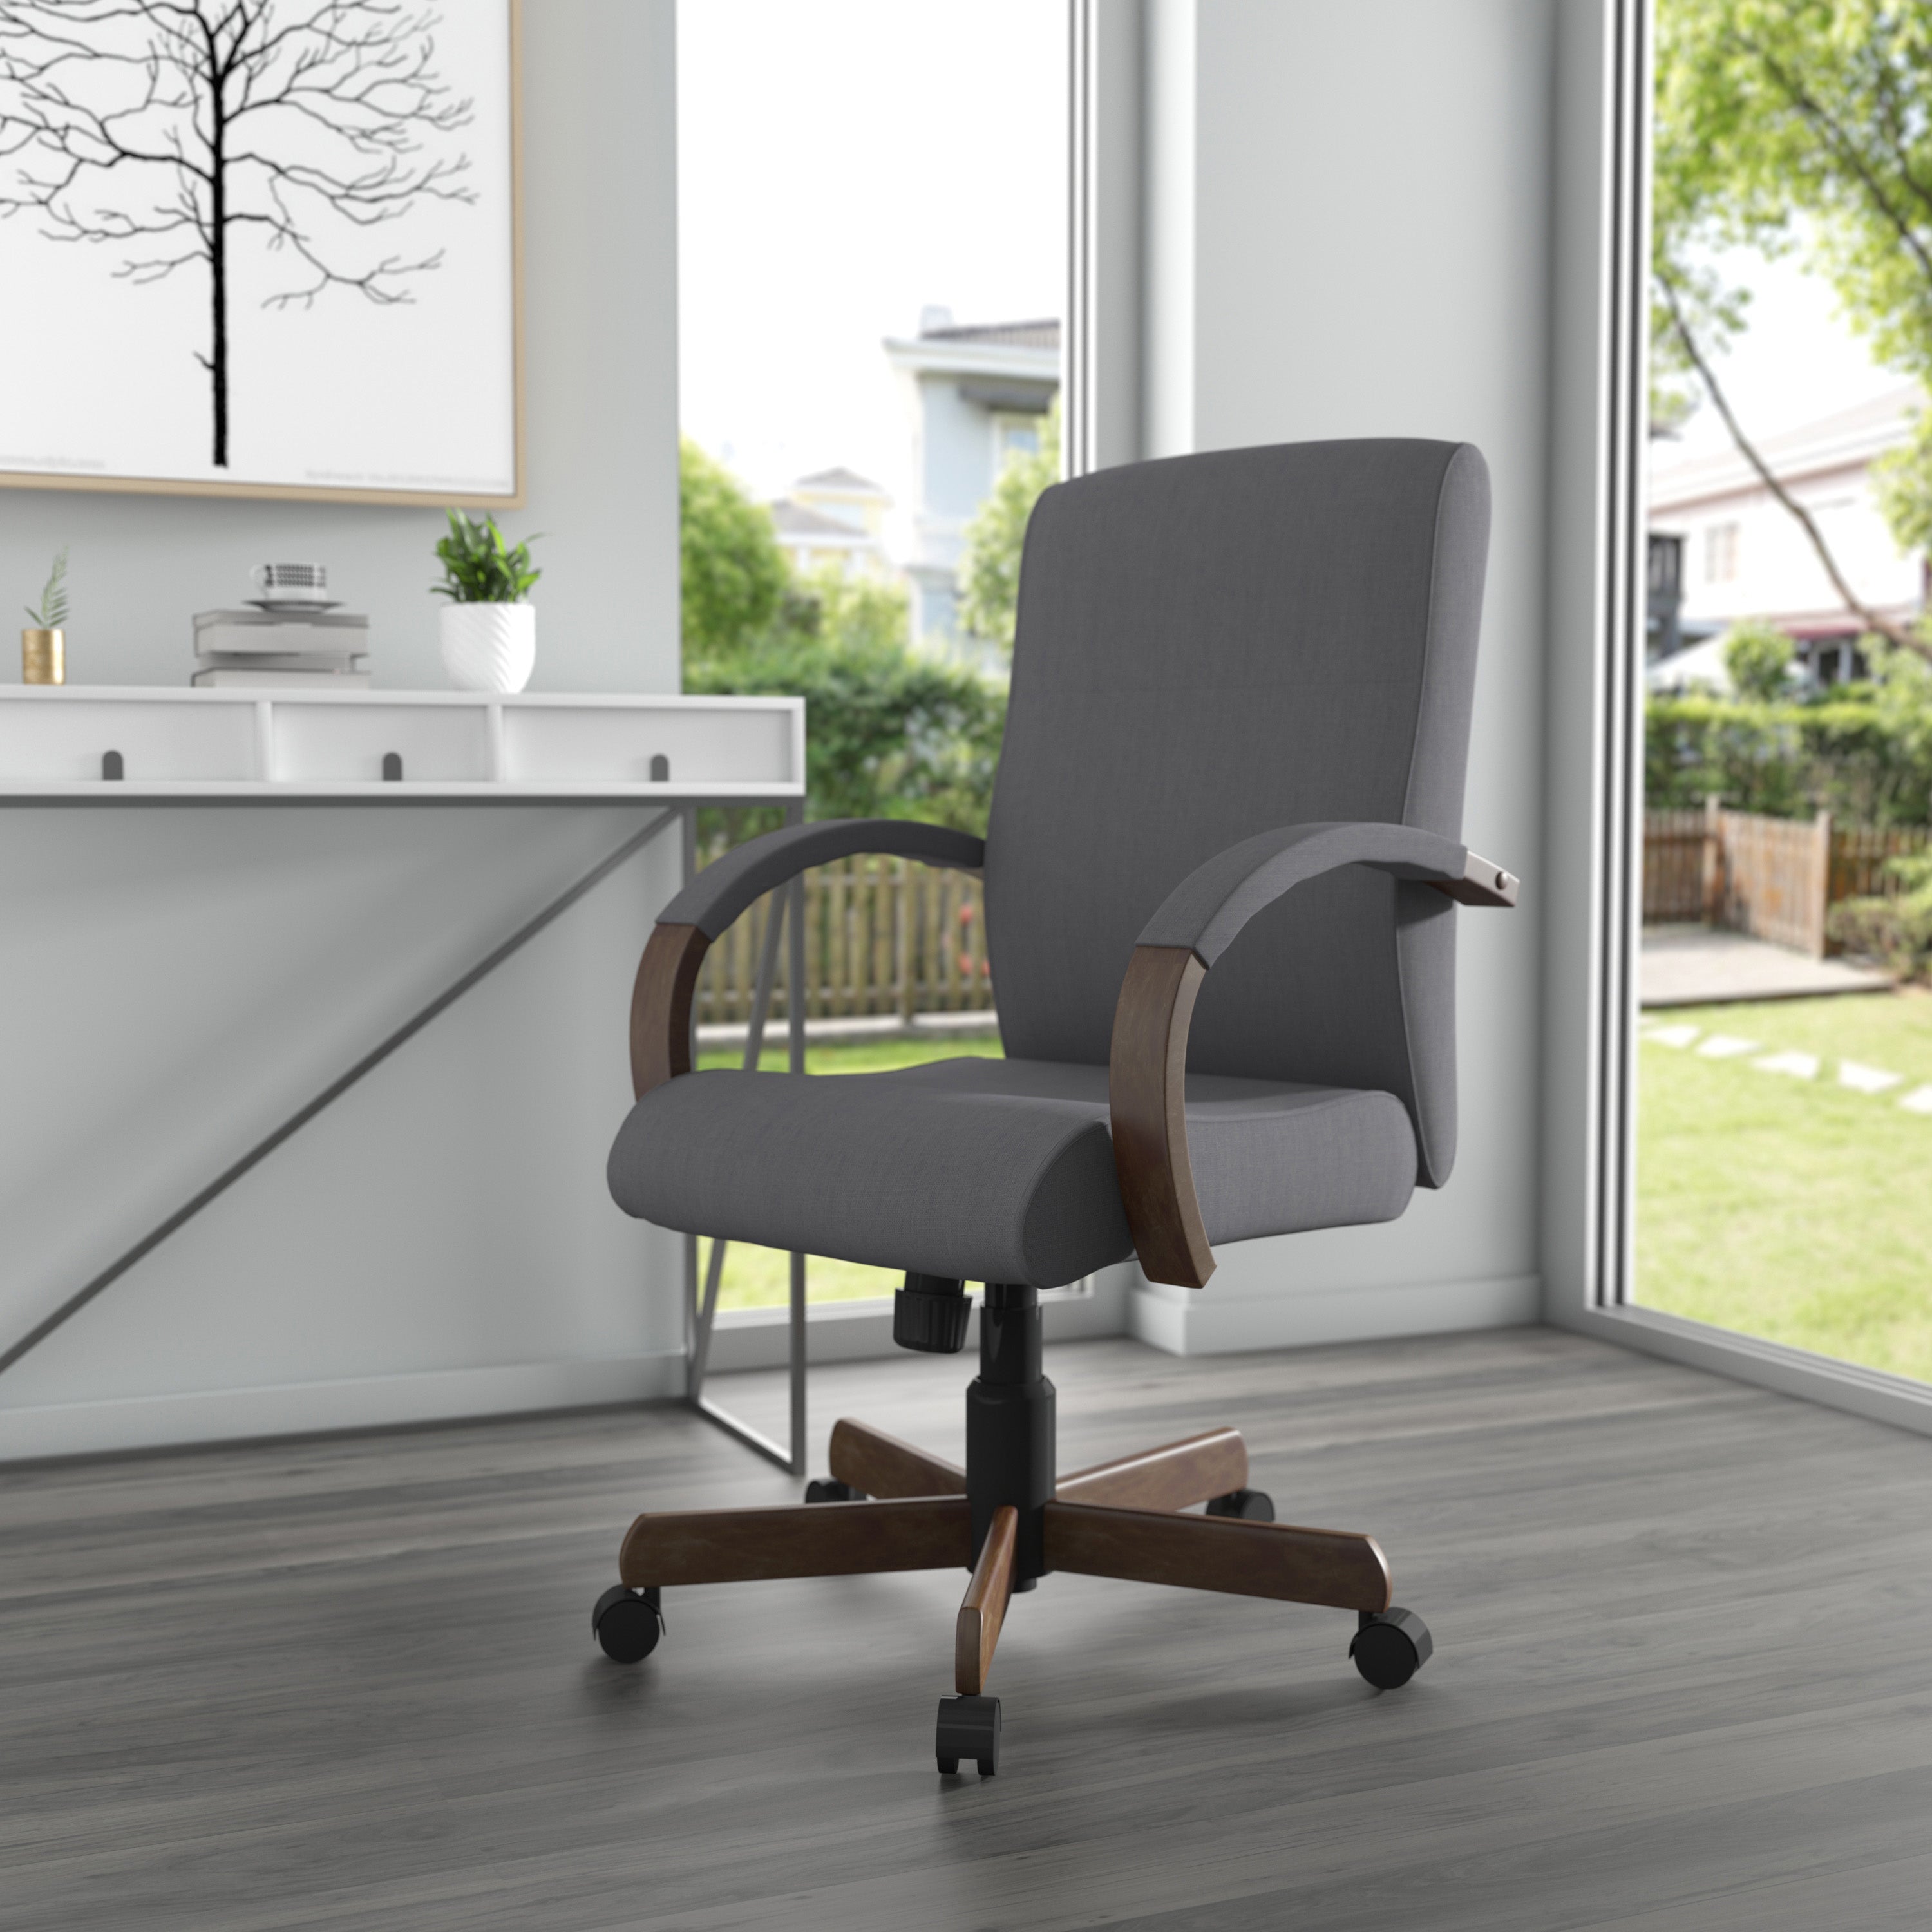 Modern Executive Conference Chair - Slate grey with Driftwood, B696DW-SG